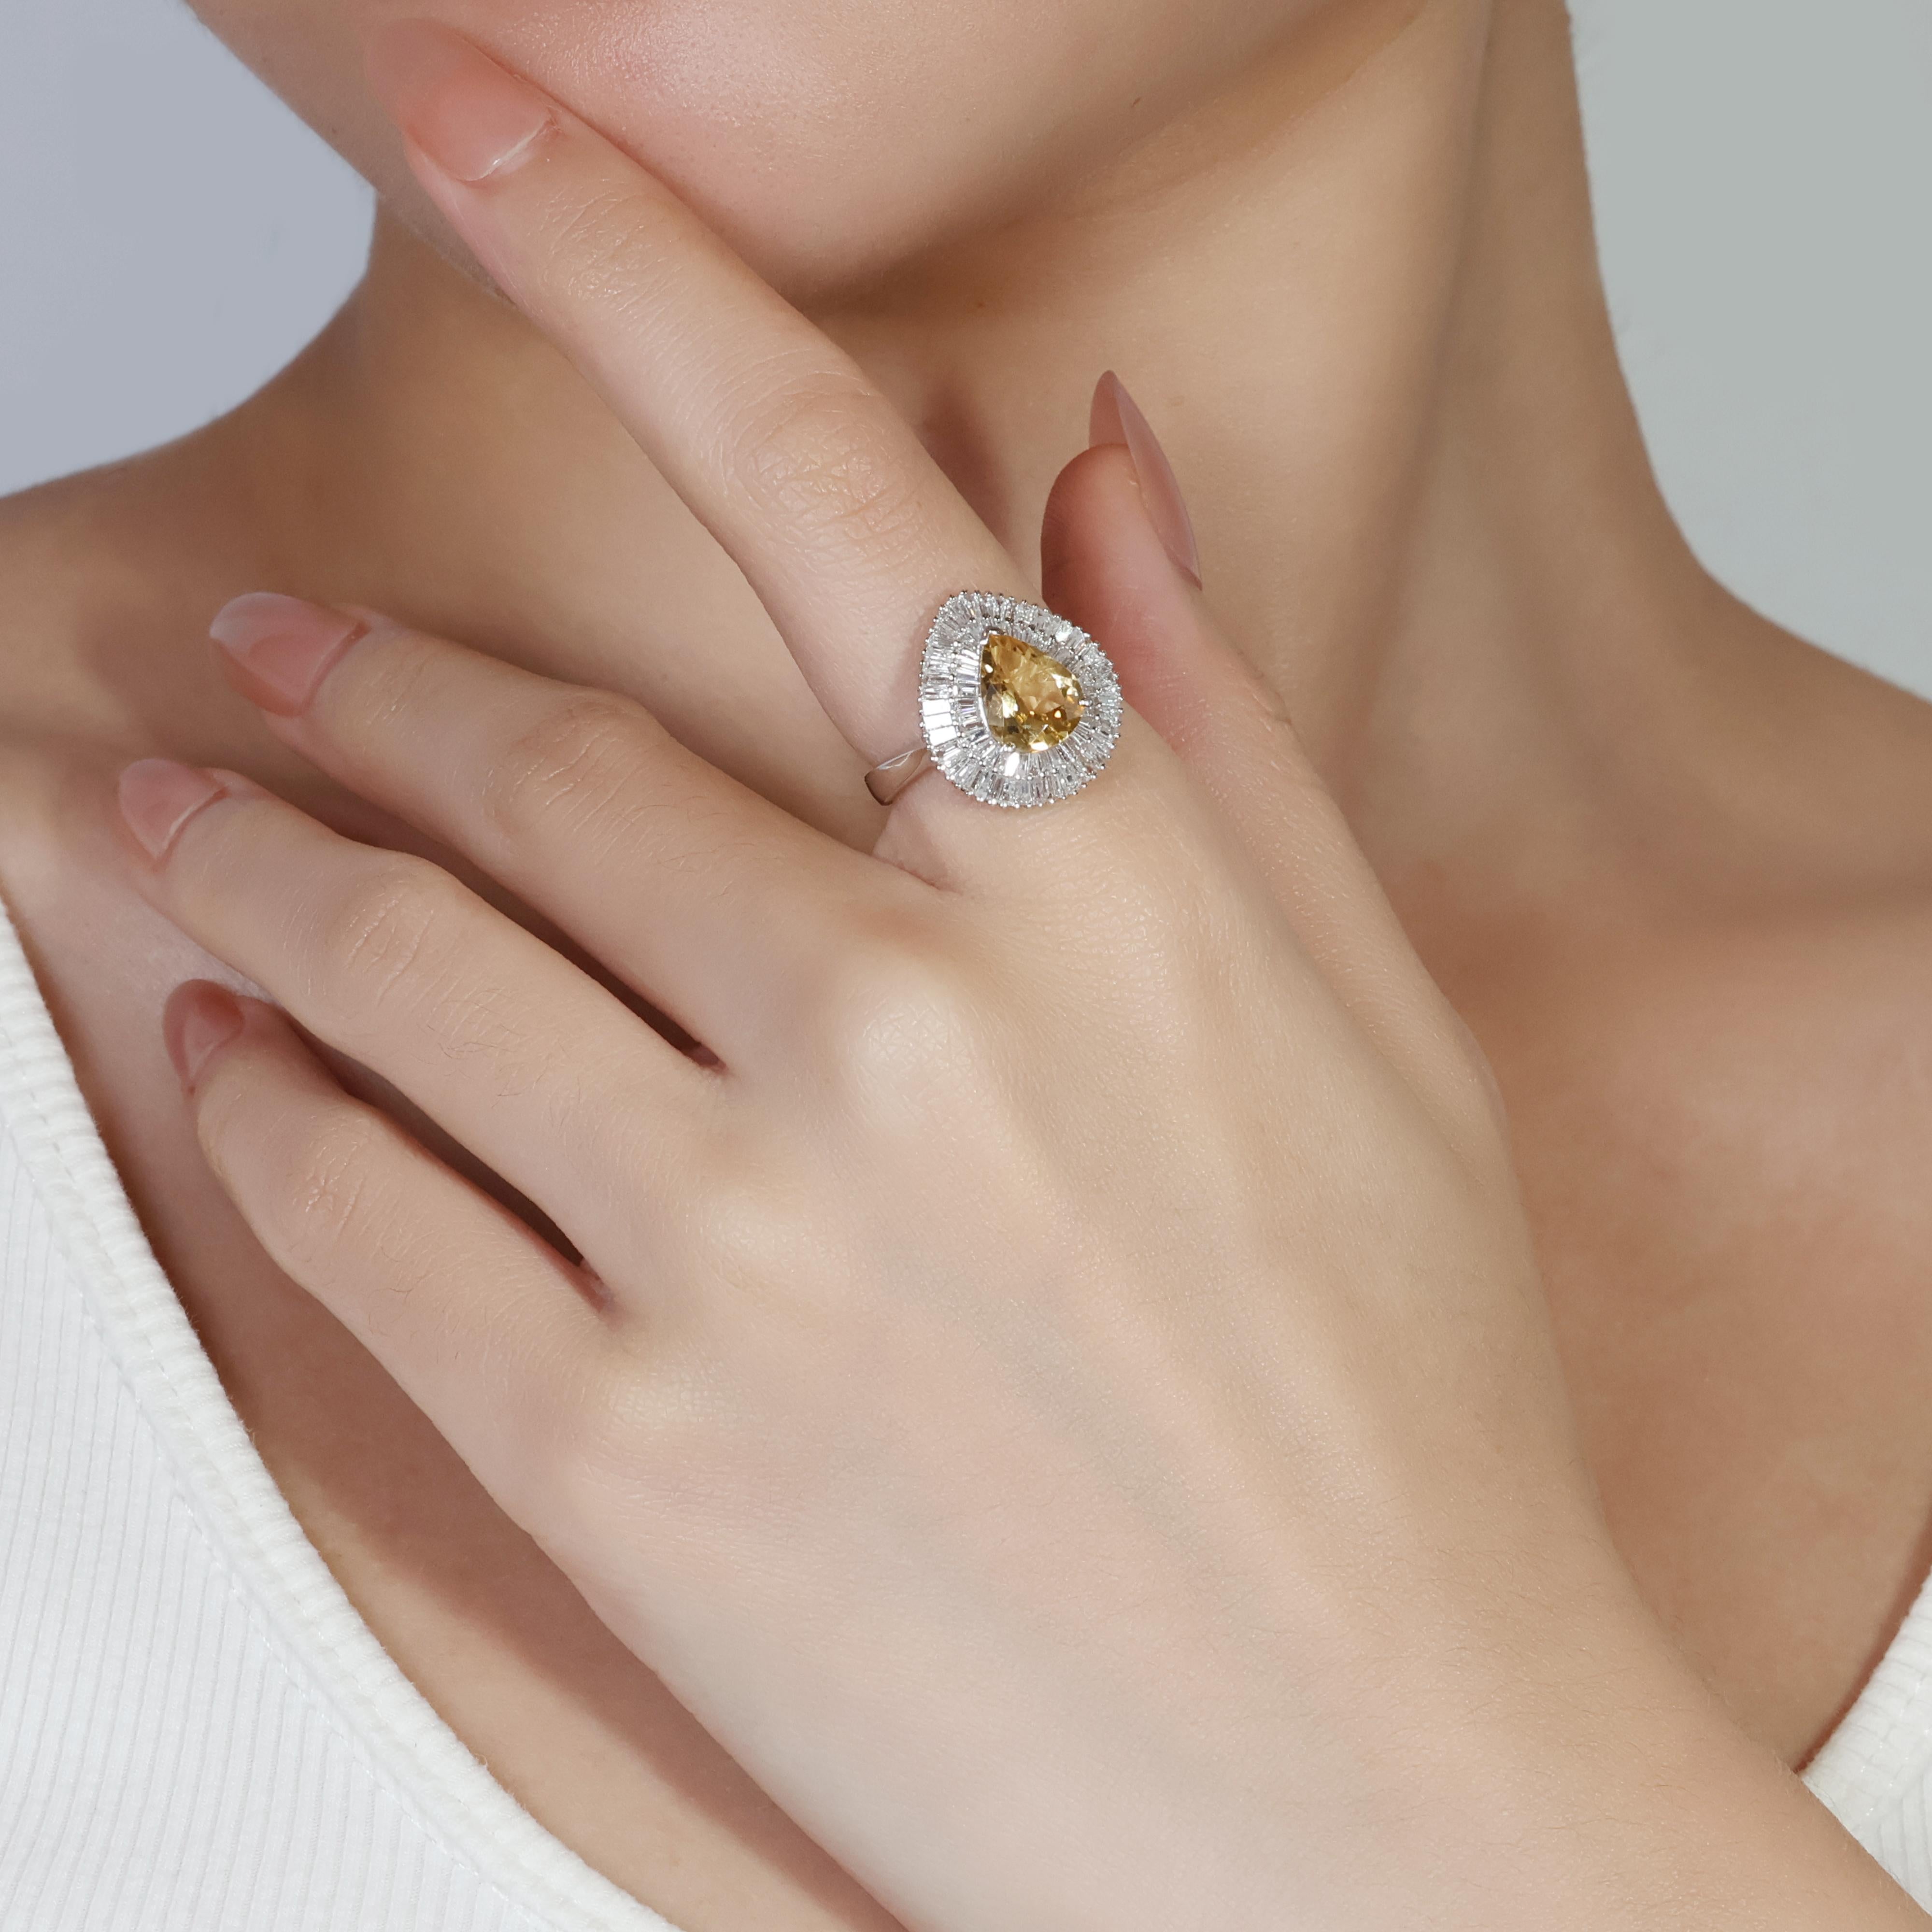 Unveiling a radiant 18k white gold ring featuring a mesmerizing 1.90-carat pear-shaped citrine as its centerpiece. Adding a touch of sparkle are 80 dazzling taper diamonds totaling 0.56 carats.  Graded H for near colorless and SI for clarity, these